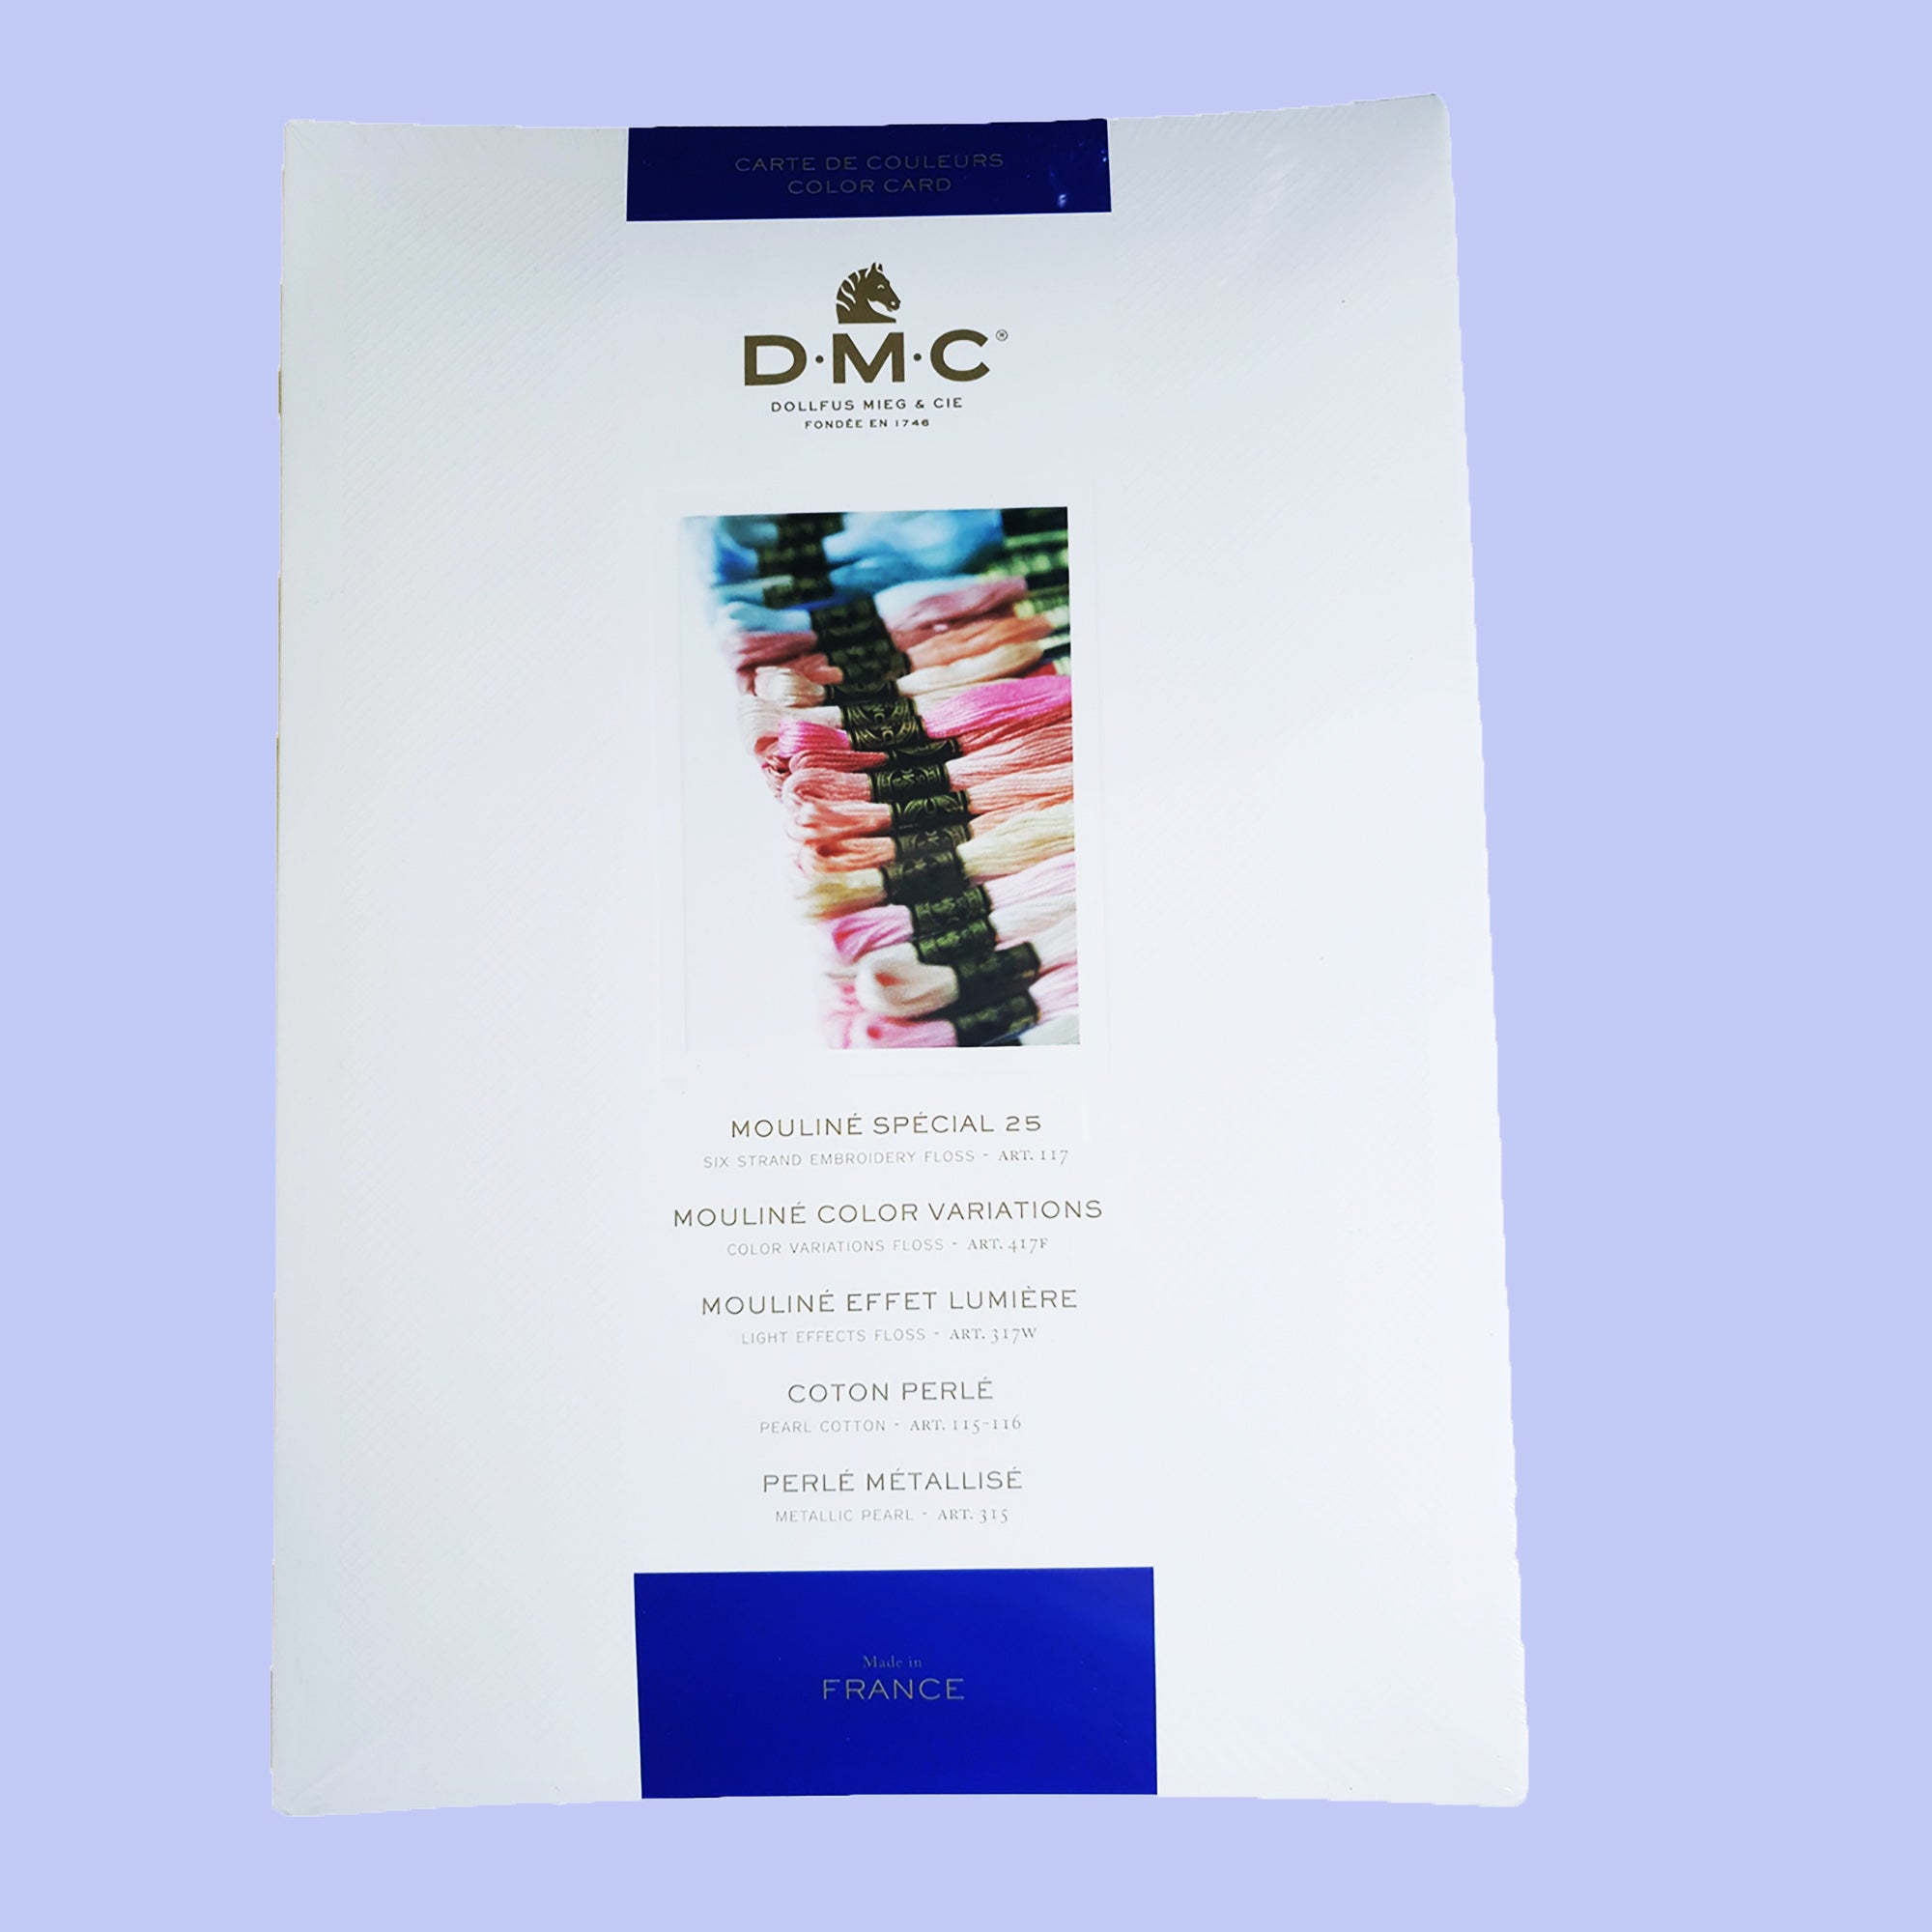 Stay Home N Craft Embroidery Floss Pack Set of 9 DMC Threads, DMC